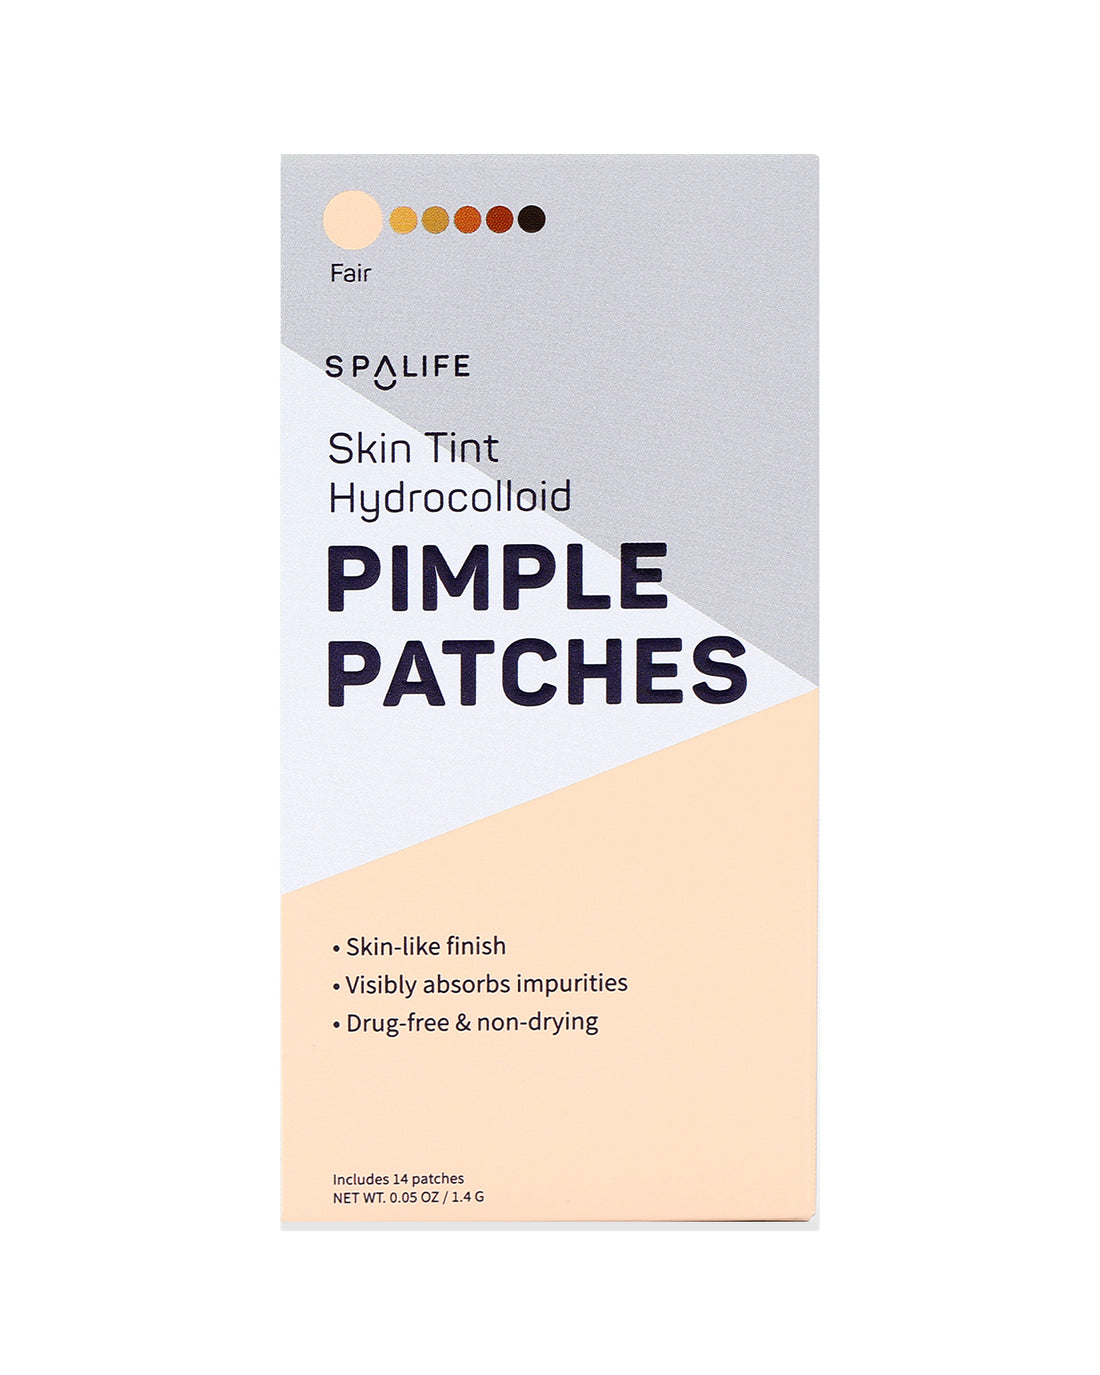 Skin_tint_pimple_patches_packe-352